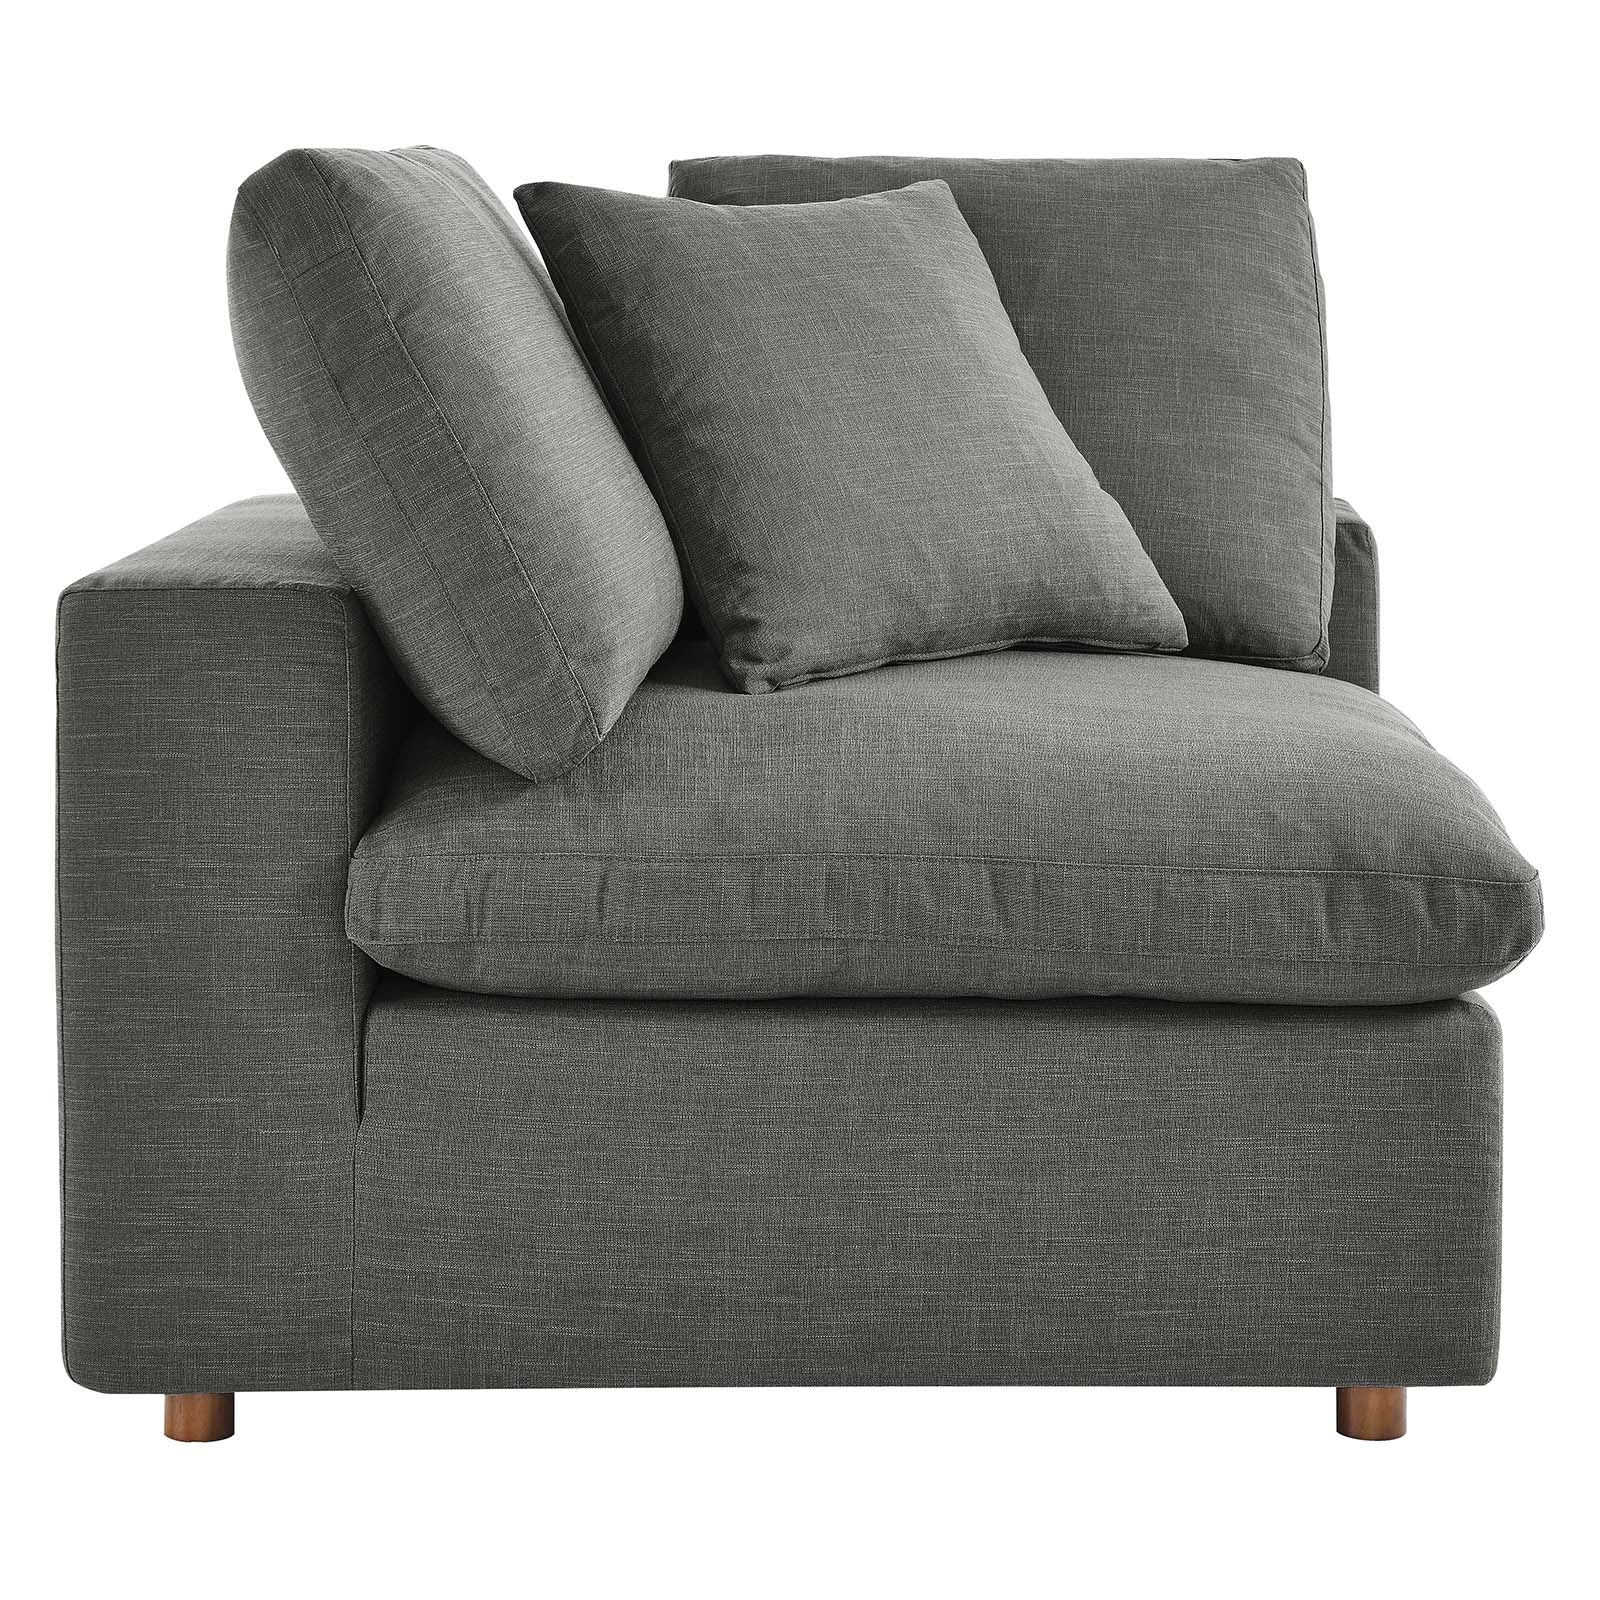 Modway Living Room Sets - Commix Down Filled Overstuffed 2 Piece Sectional Sofa Set Gray